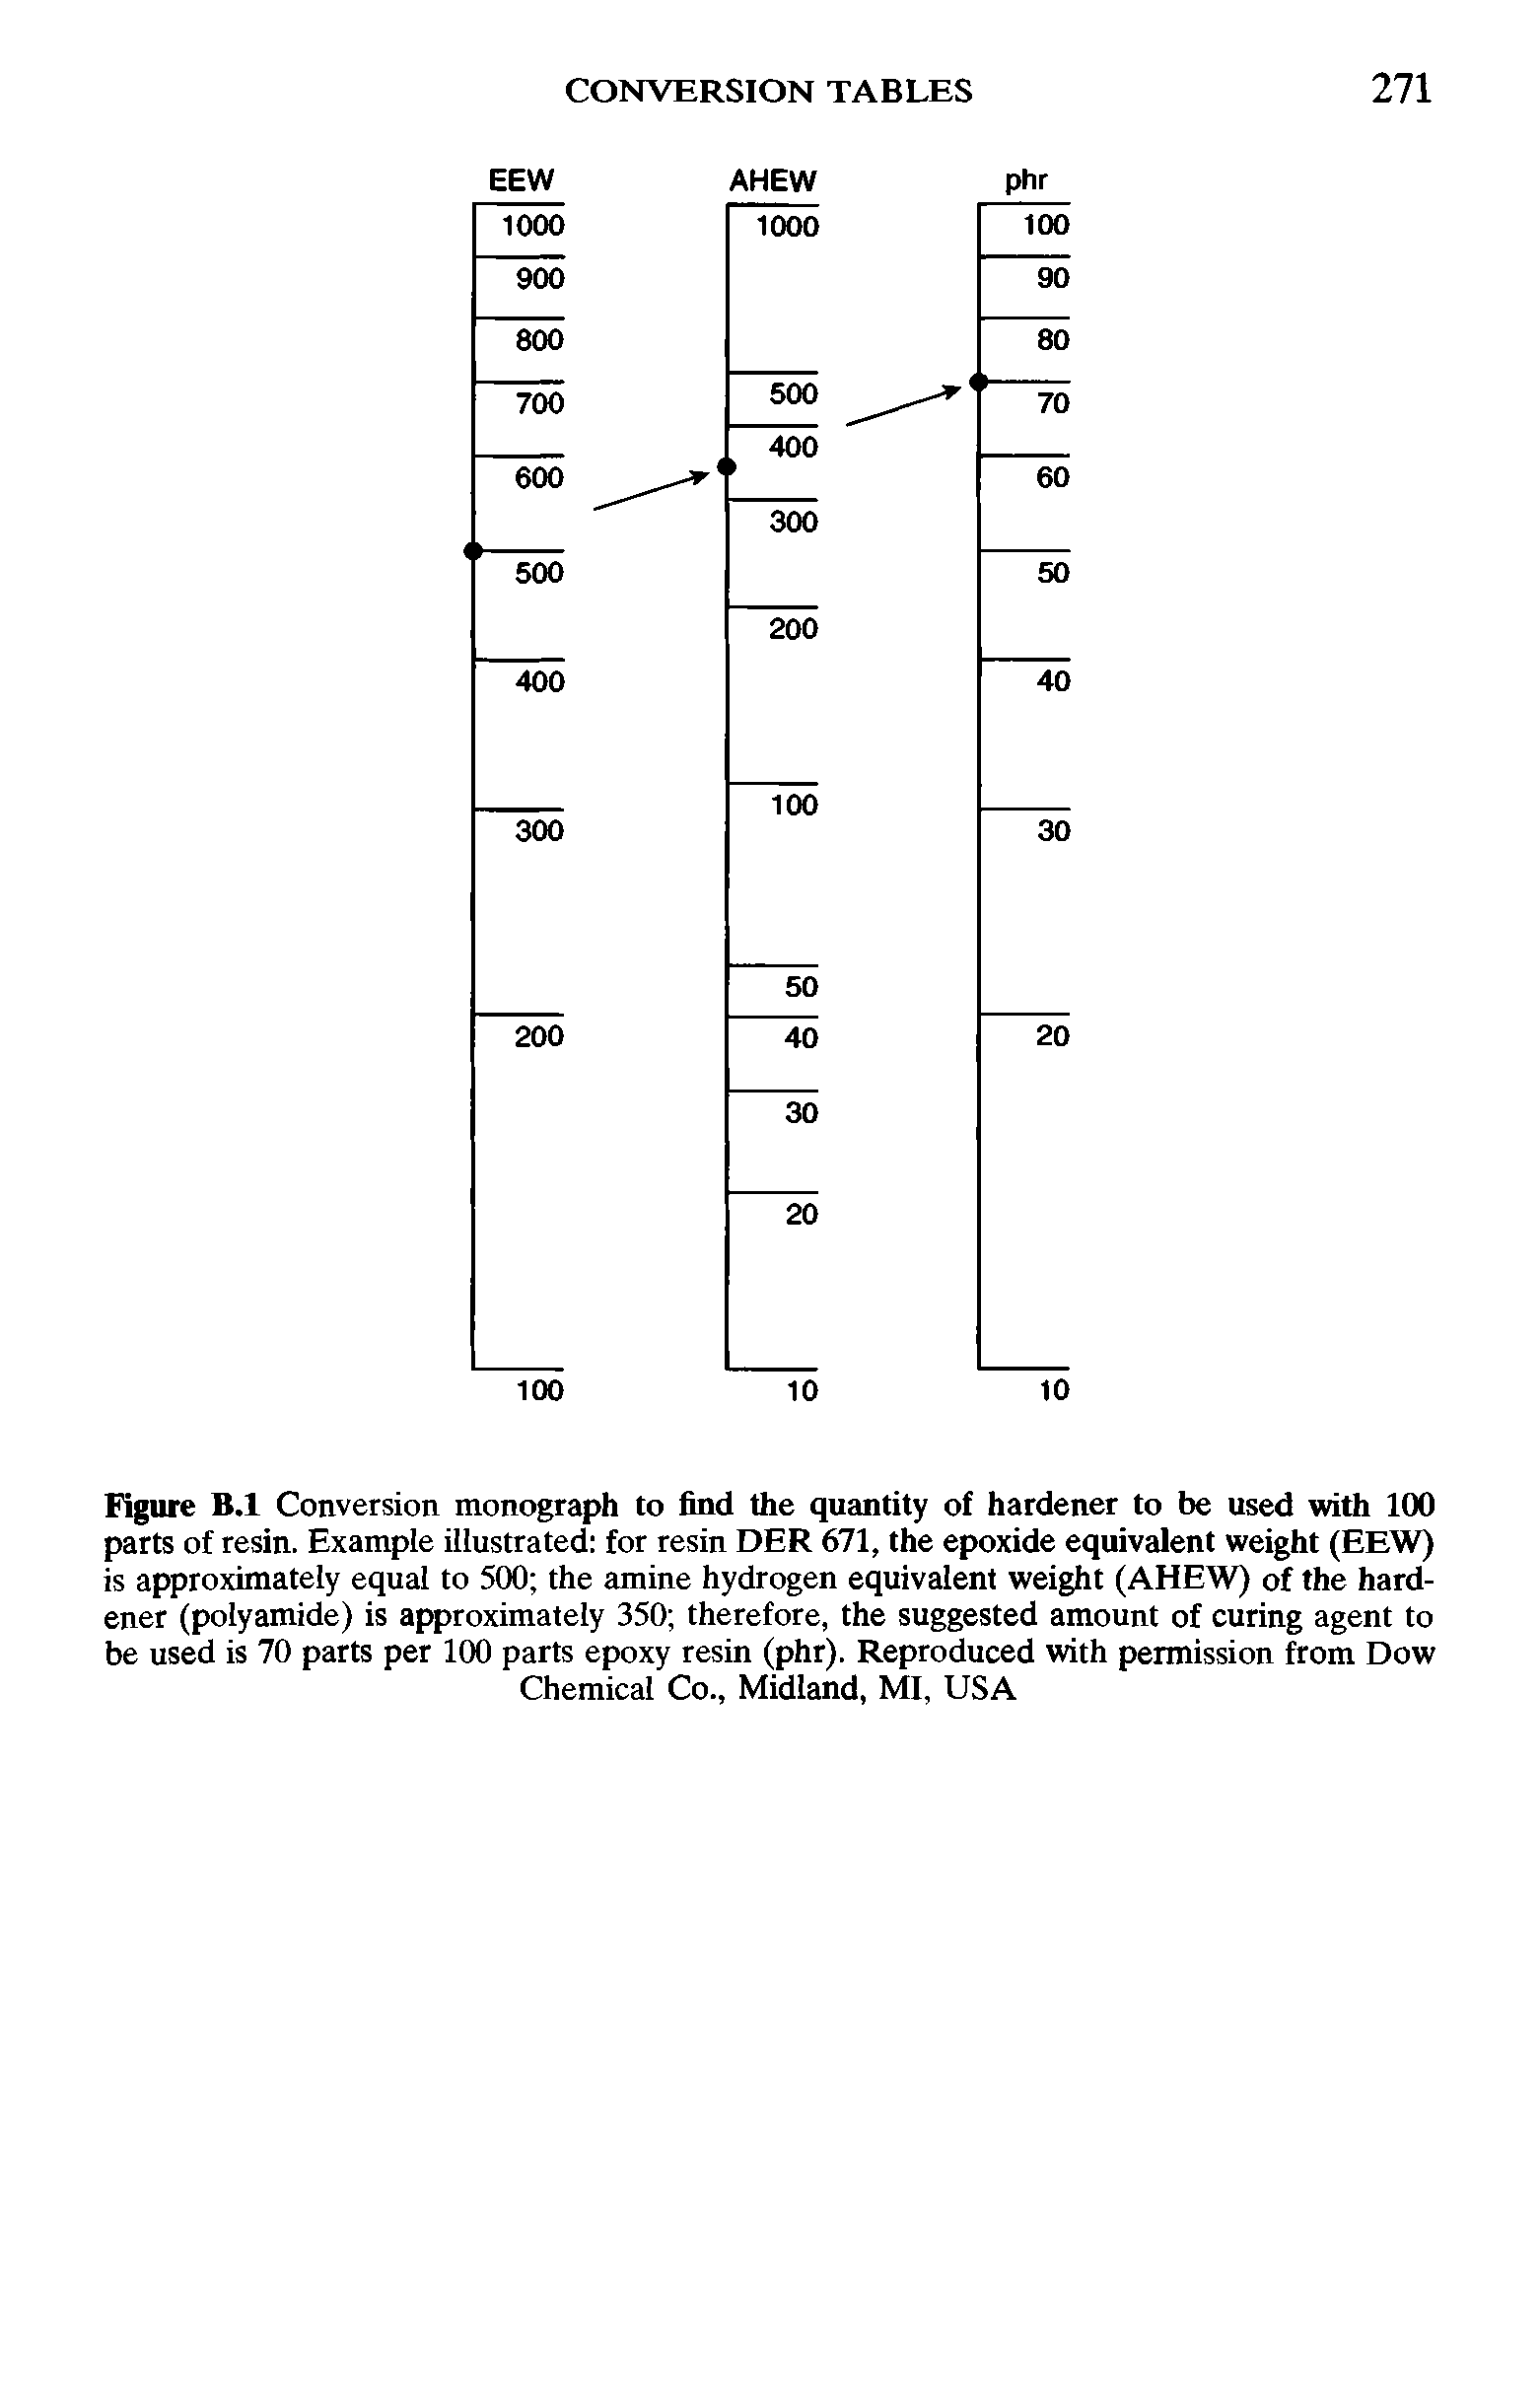 Figure B.l Conversion monograph to find the quantity of hardener to be used with 100 parts of resin. Example illustrated for resin DER 671, the epoxide equivalent weight (EEW) is approximately equal to 500 the amine hydrogen equivalent weight (AHEW) of the hardener (polyamide) is approximately 350 therefore, the suggested amount of curing agent to be used is 70 parts per 100 parts epoxy resin (phr). Reproduced with permission from Dow Chemical Co., Midland, MI, USA...